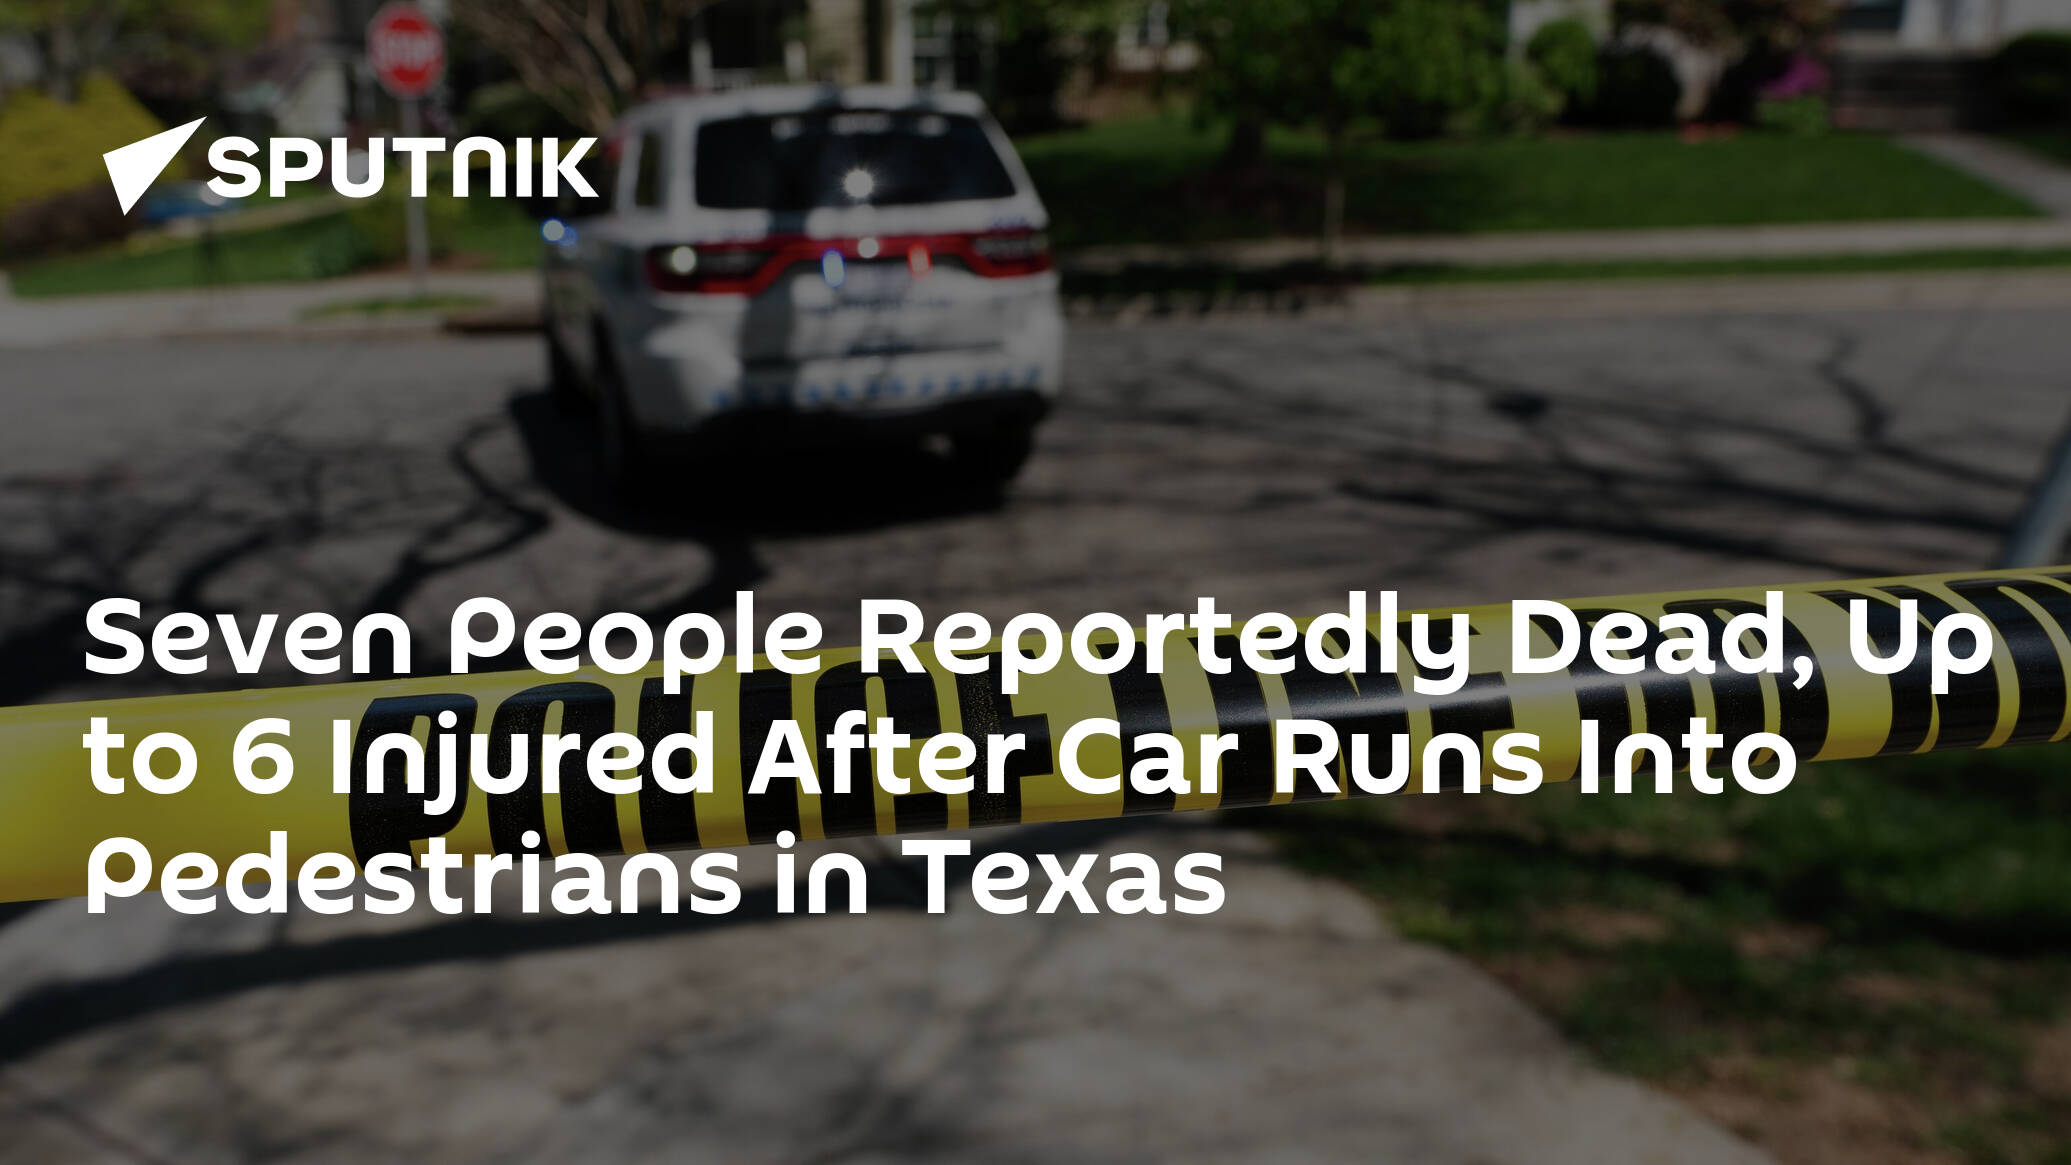 Seven People Reportedly Dead, Up to 6 Injured After Car Runs Into Pedestrians in Texas